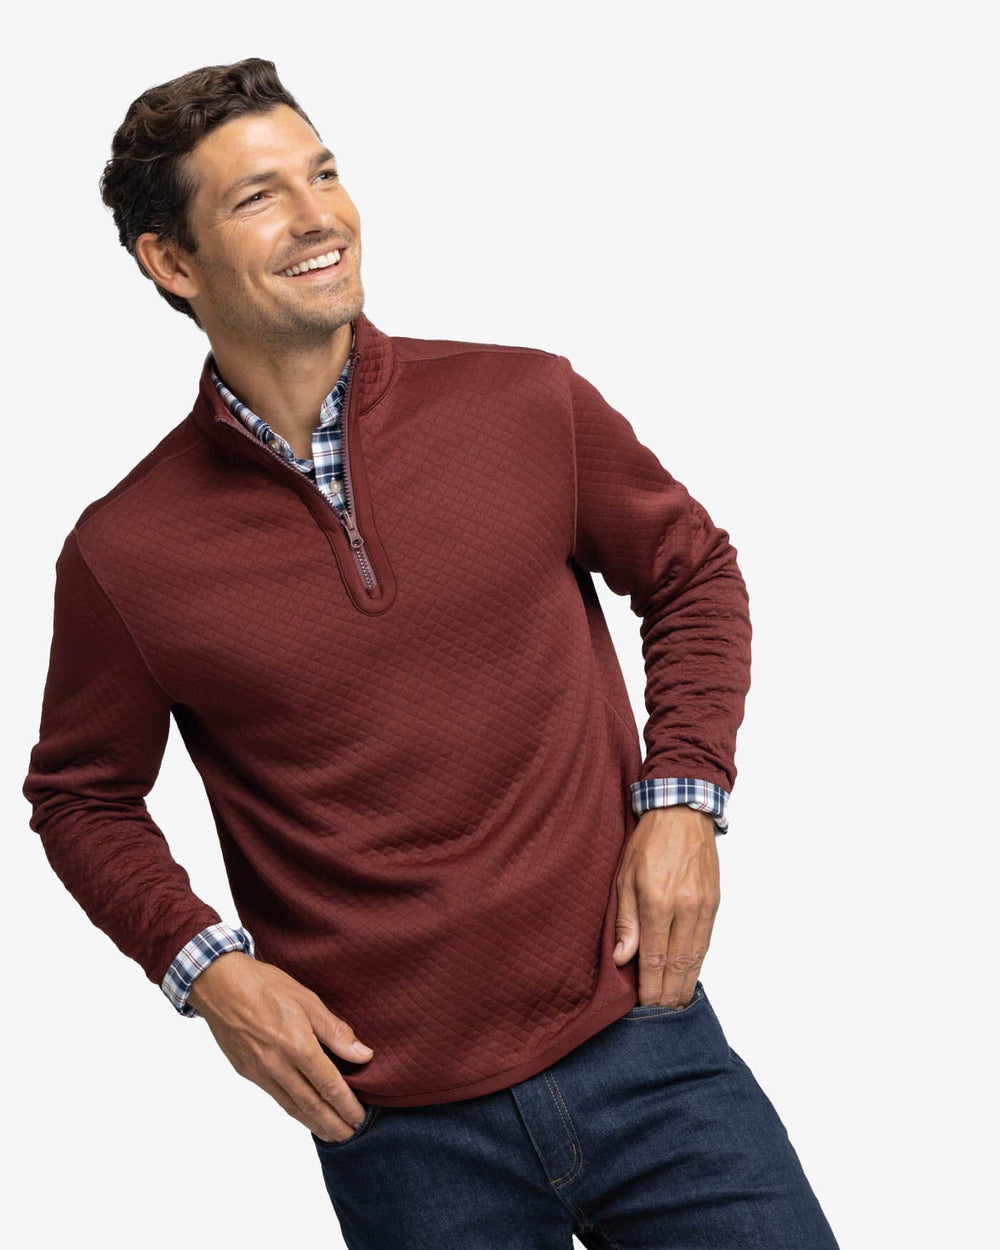 The front view of the Southern Tide Arden Reversible Quarter Zip by Southern Tide - Bordeaux Red